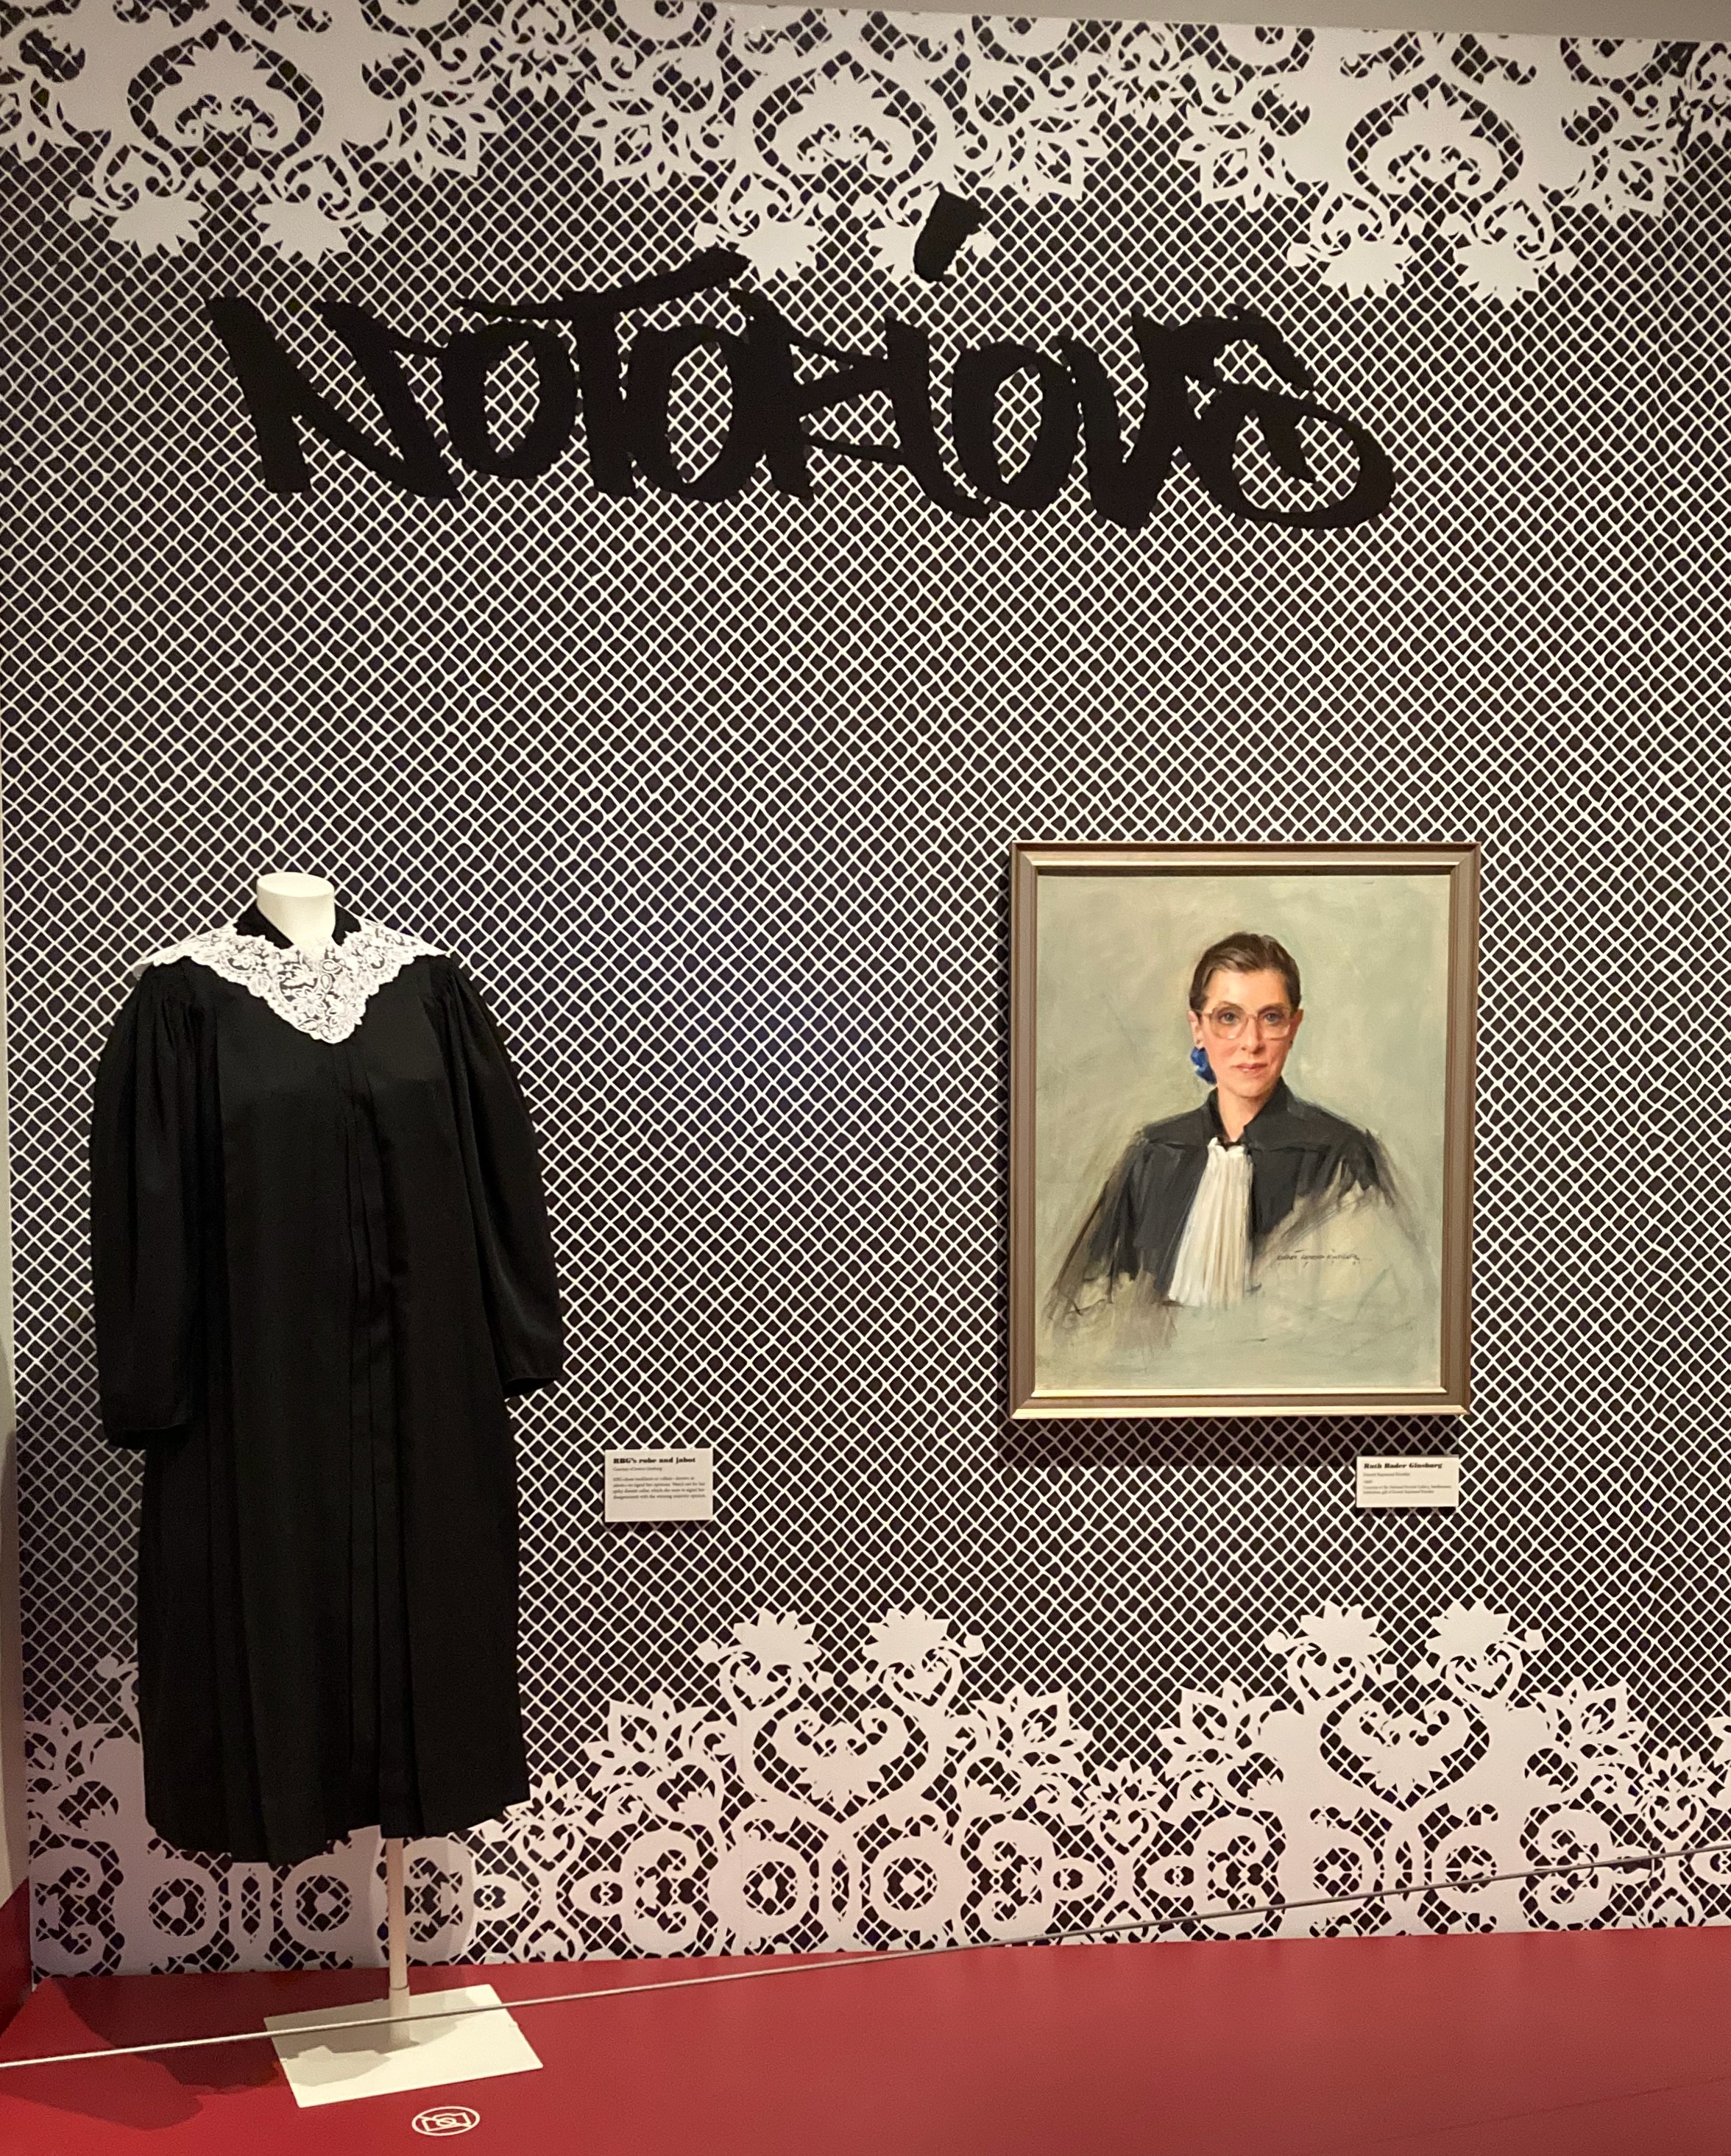 RBG Robe and Painting in museum setting